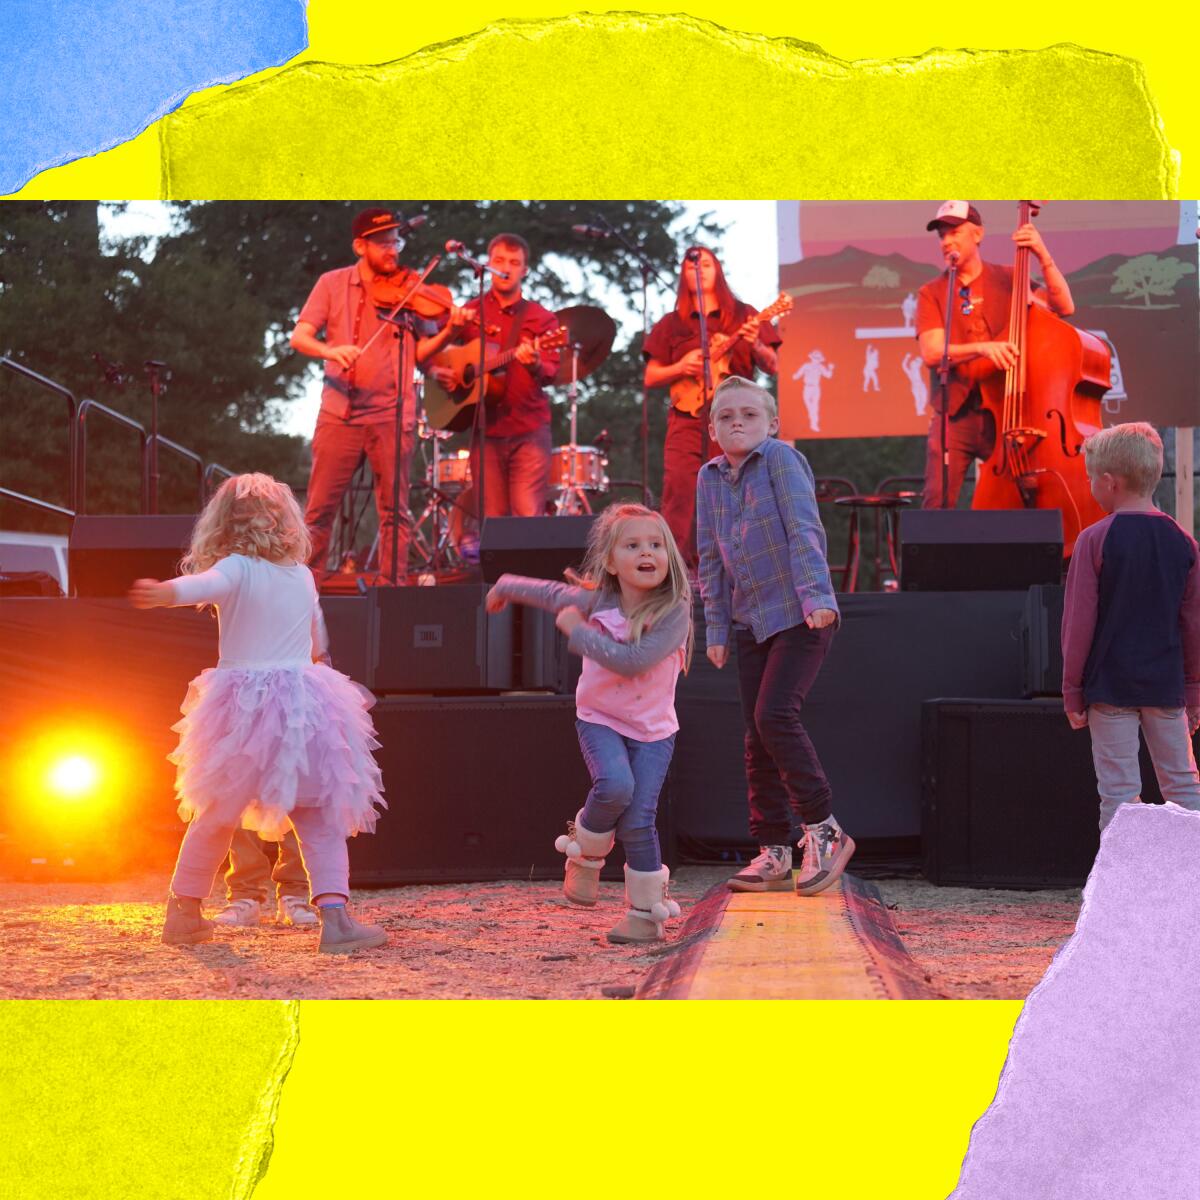 Four small children dance in front of an outdoor stage where a four-piece band plays.